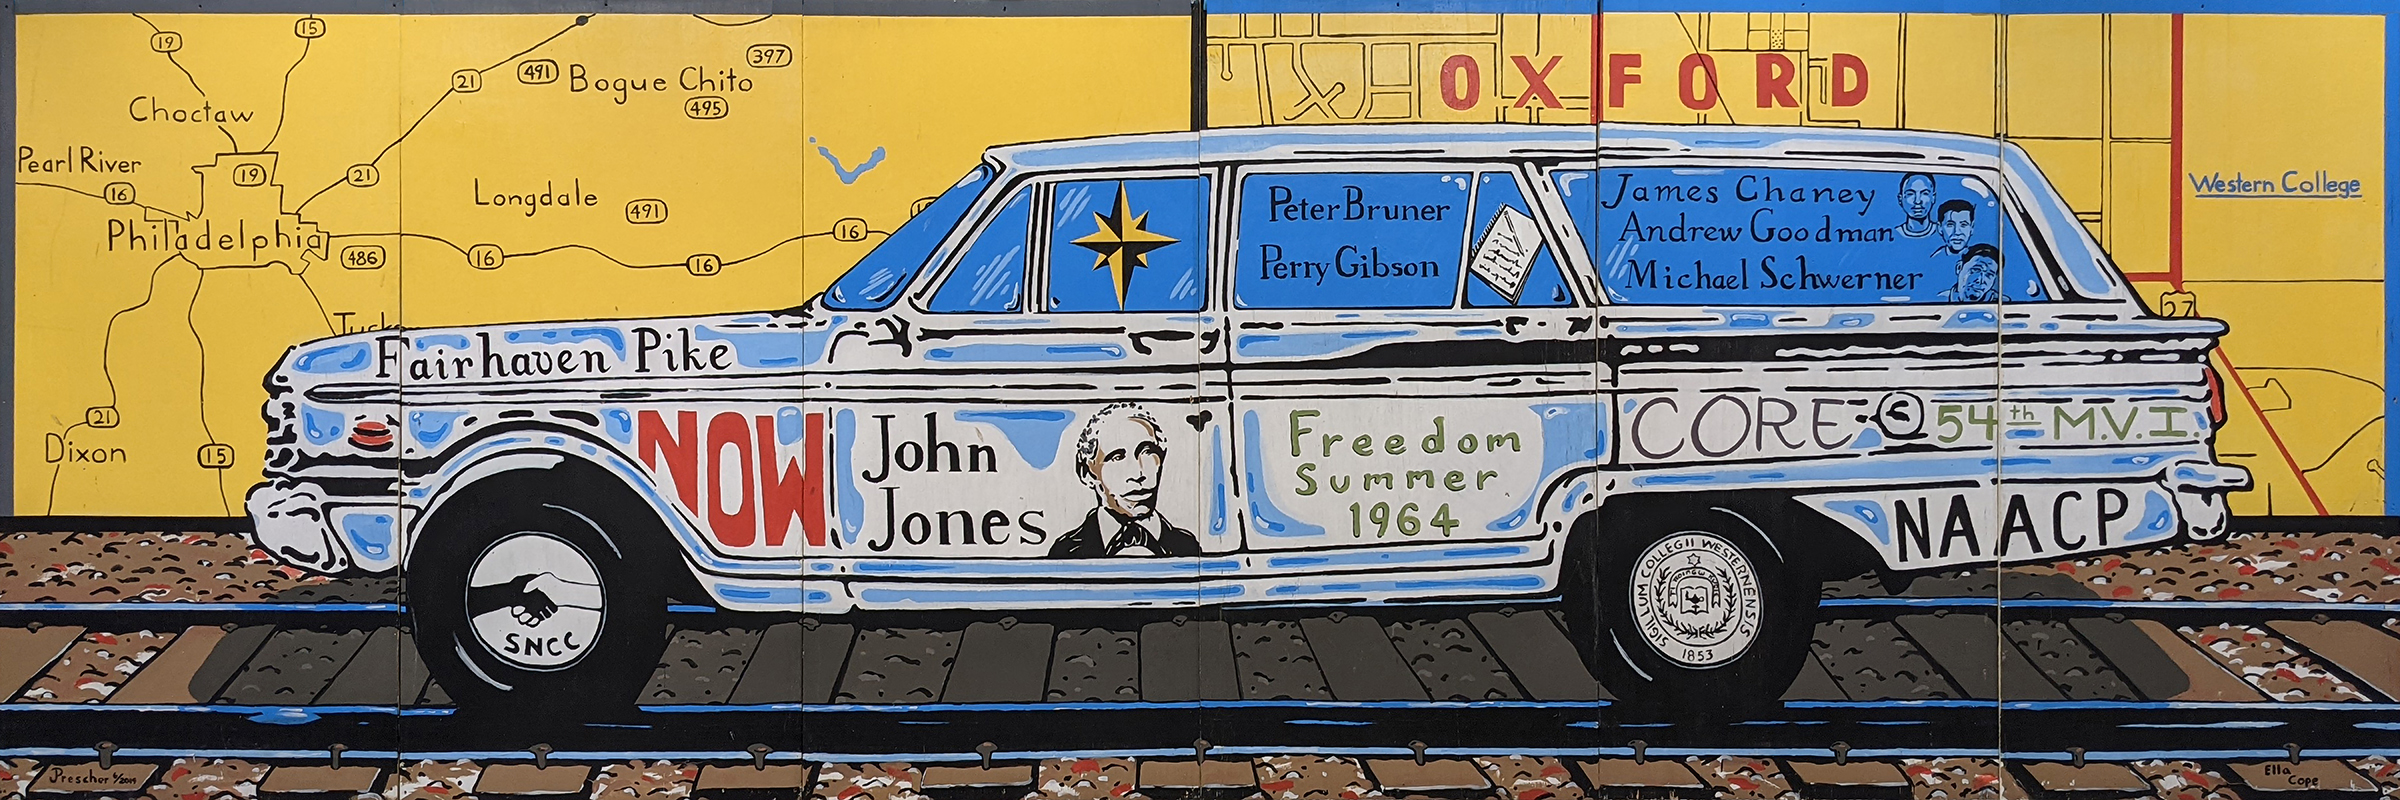 The Changemakers of Oxford, 2019. Mural by Ella Cope and Joe Prescher. Conceived of and contracted by Ella Cope in fulfillment of the Girl Scout Gold Award, with design contributions and painting by Joseph Prescher. The mural presents a comprehensive picture of civil rights work in Oxford, Ohio from the 1800s to the 1970s. The mural is dedicated to James Chaney, Andrew Goodman, and Michael Schwerner. © 2021, Jason Shaiman